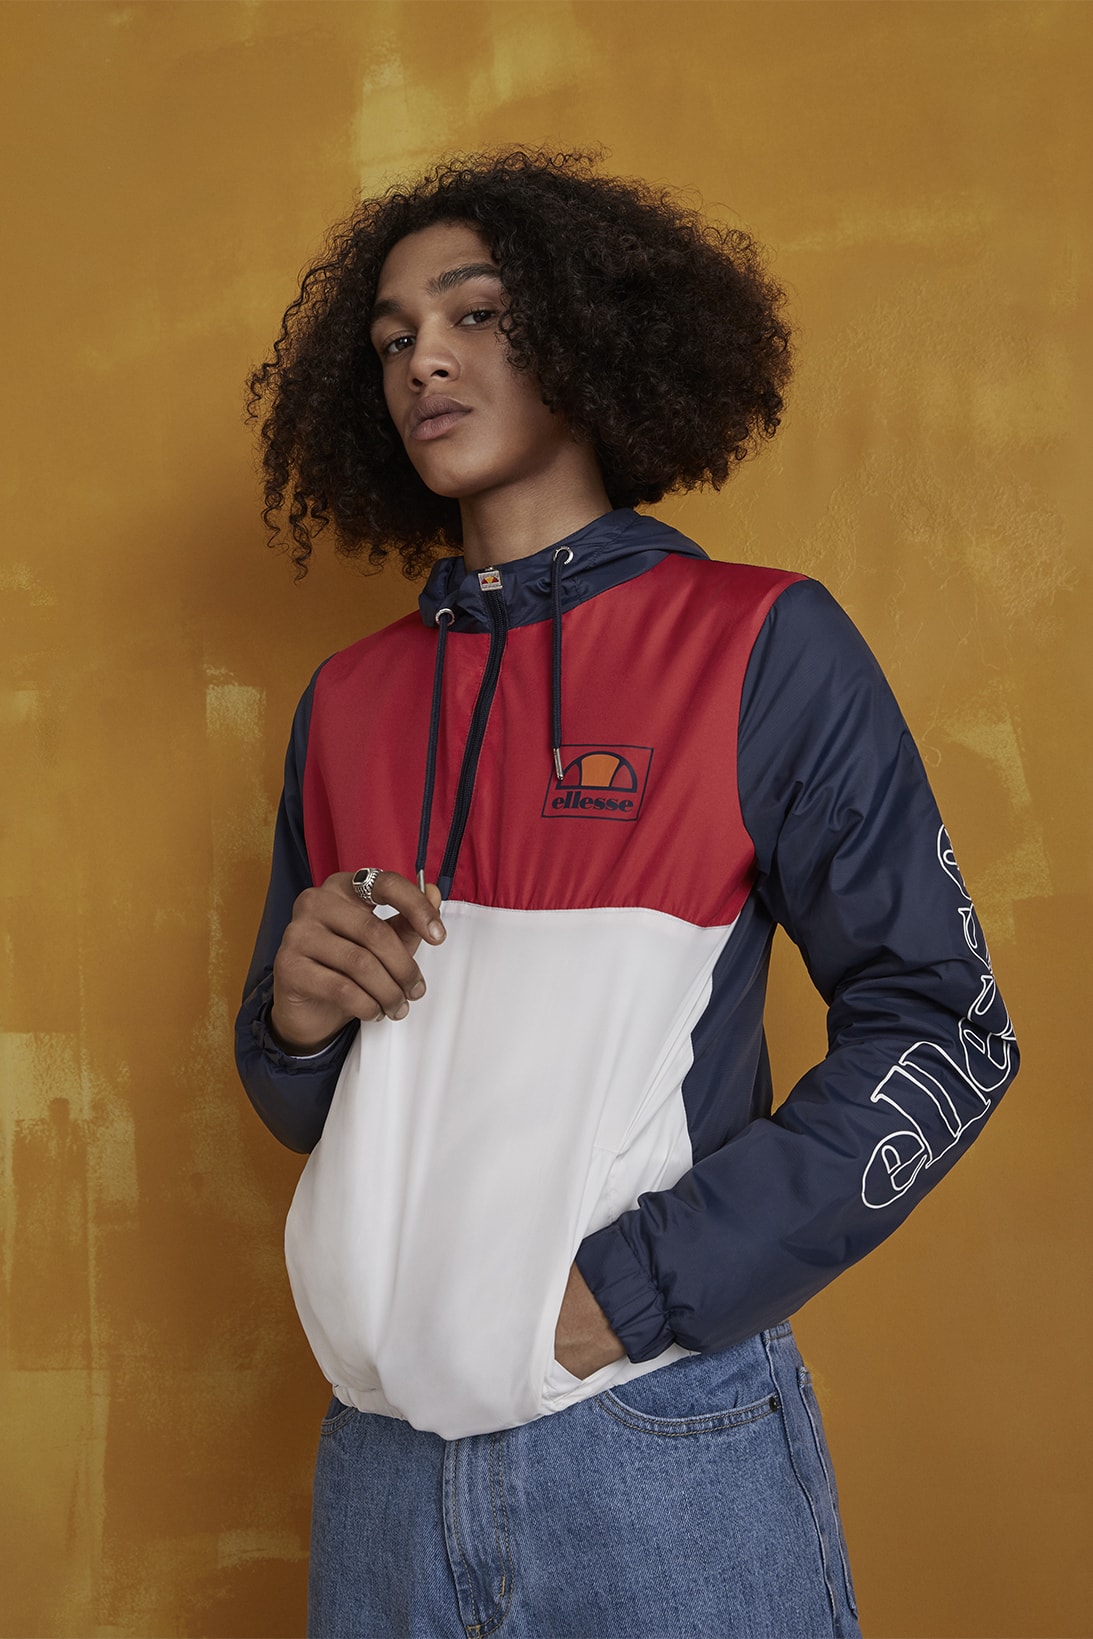 ellesse Latest News, Updates & Collections